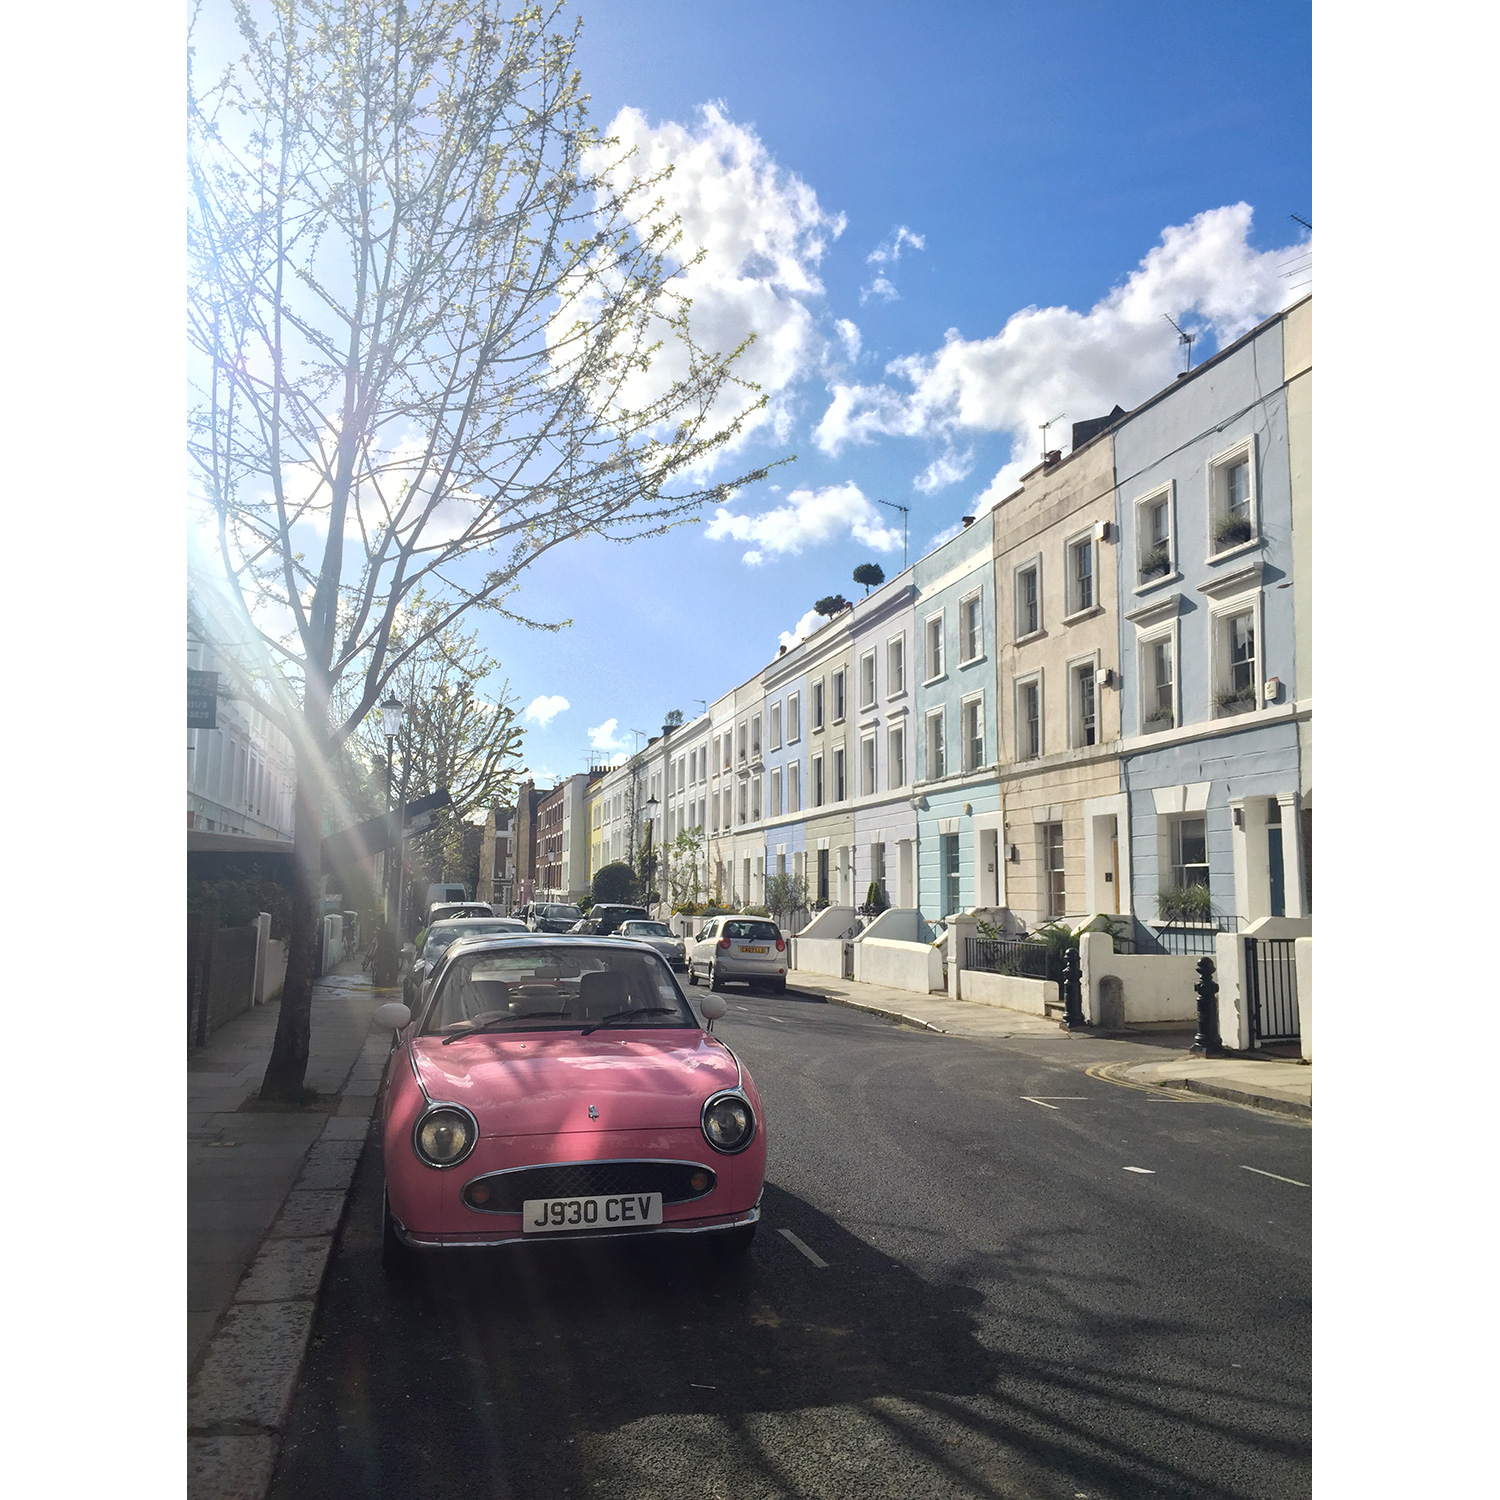 Oh Notting Hill, you're doing it again 😍